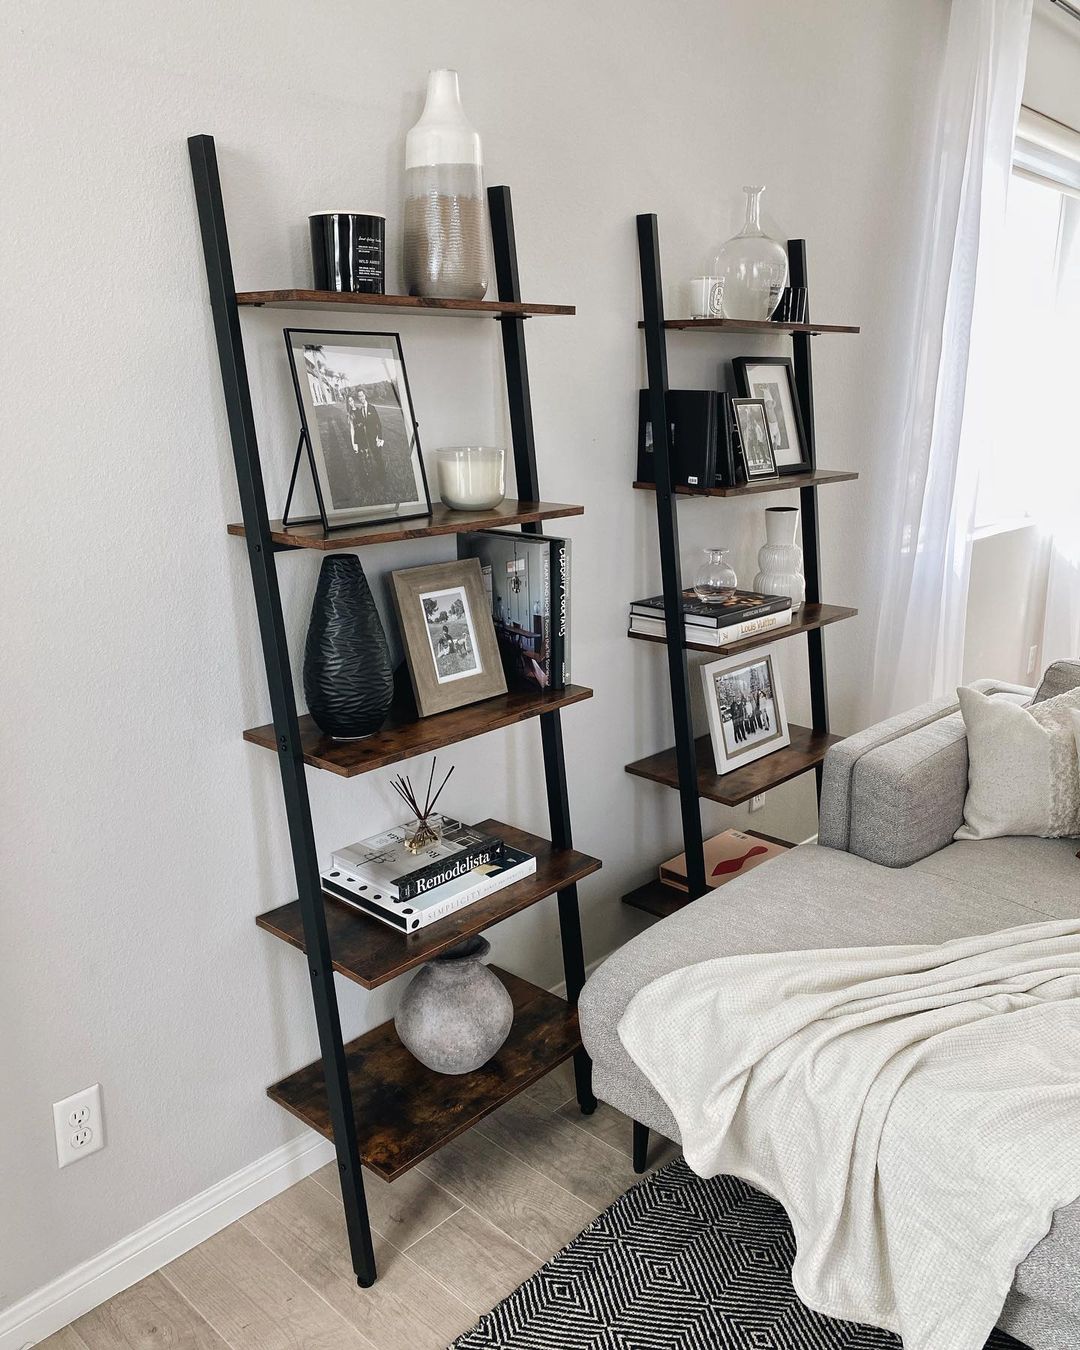 two ladder-bookshelves provide way more display space than one and looks balanced when they're styled next to each other in a living room